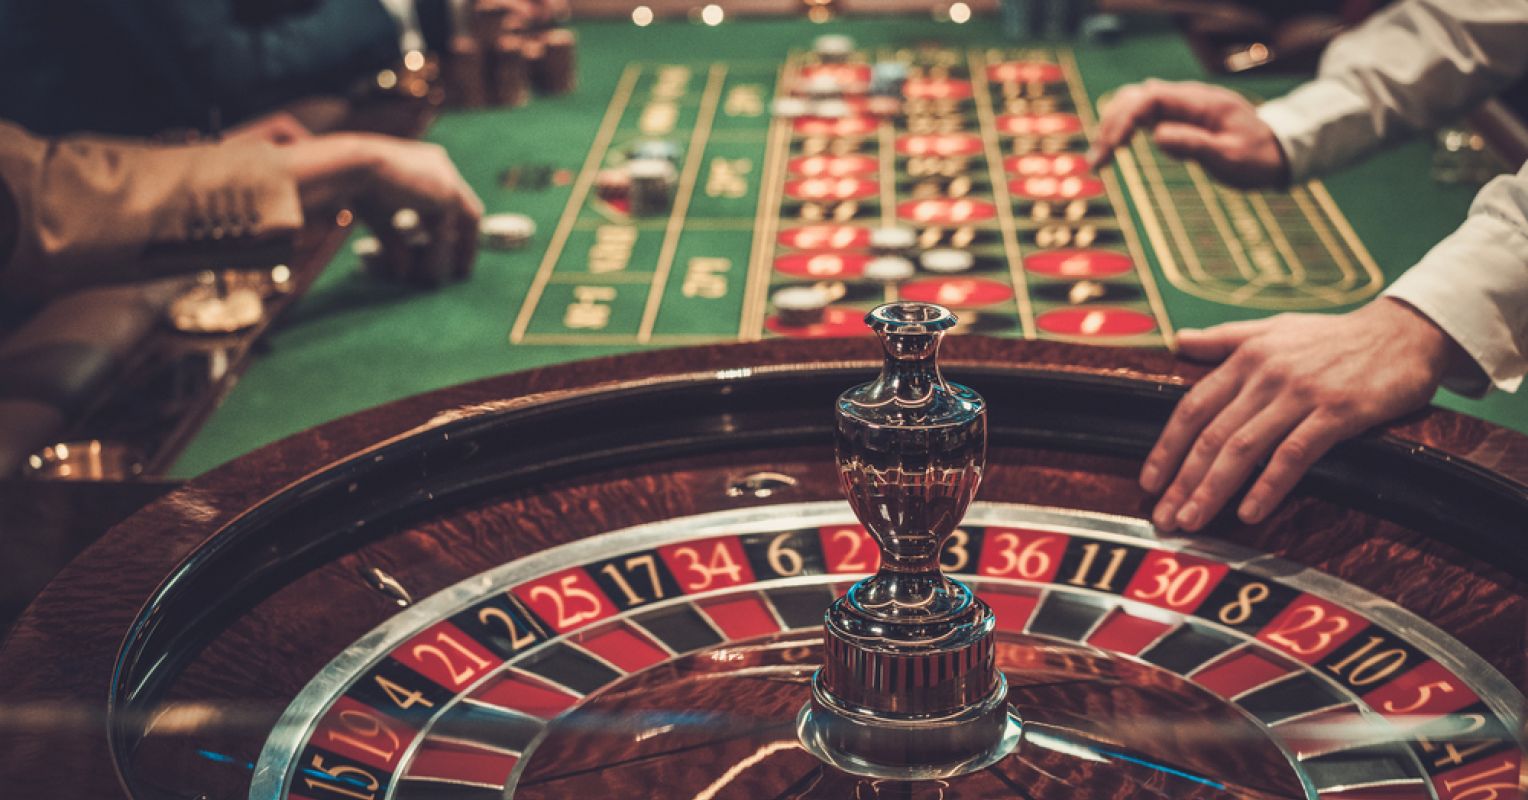 Cashing Out" In Gambling | Psychology Today